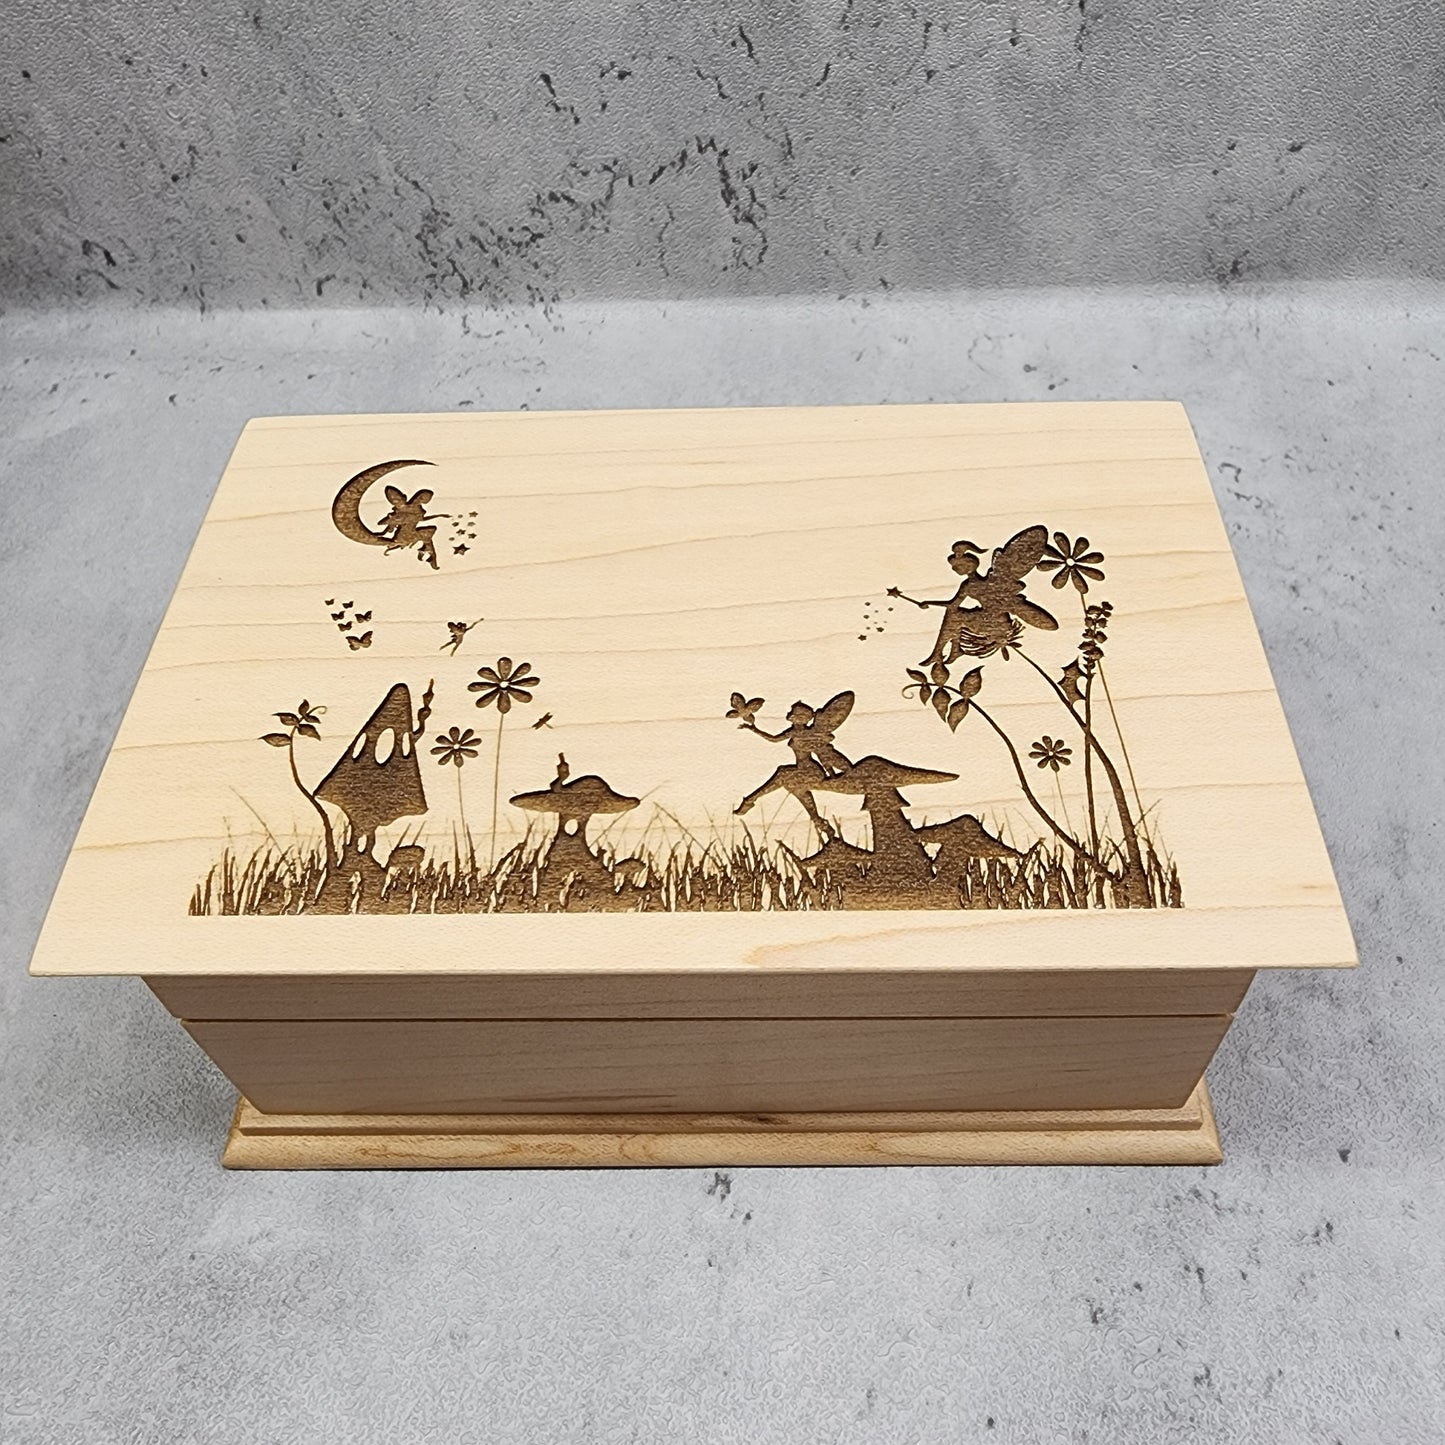 fairy world engraved jewelry box with music box movement built in. customized gift, personalized engravings